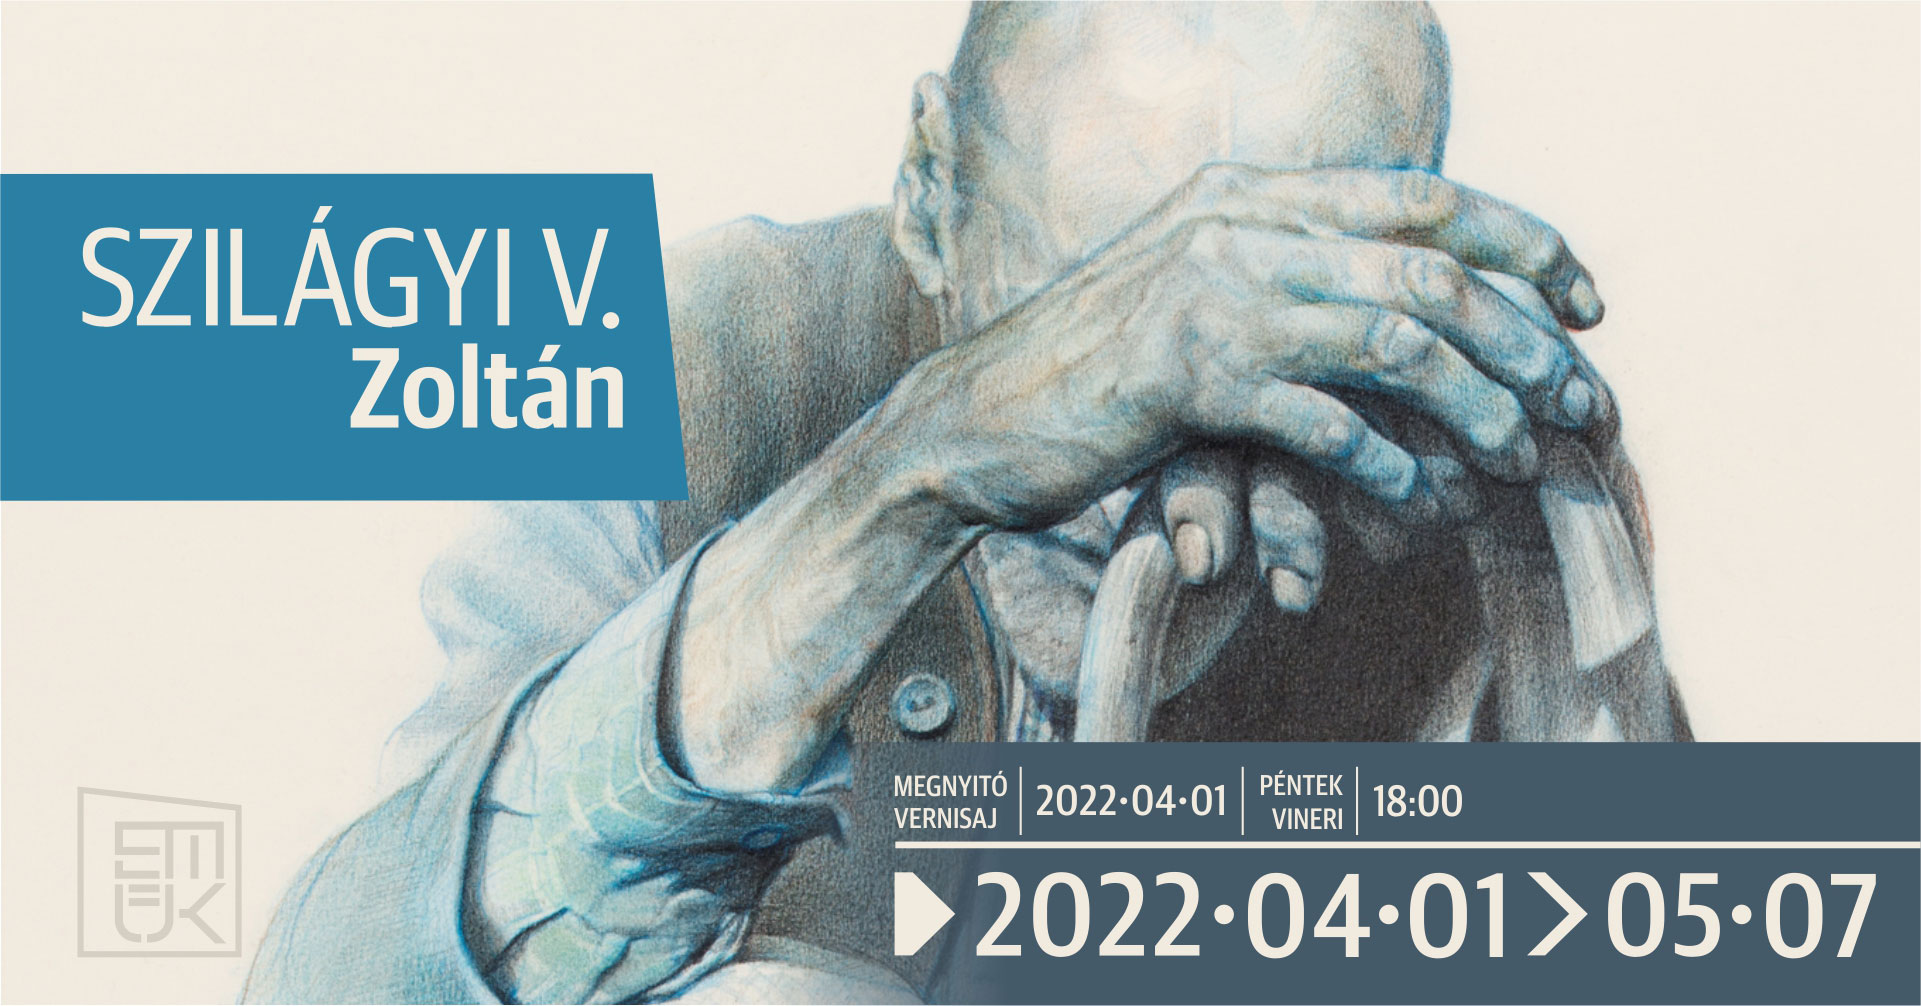 Exhibition of graphic artist and animated film director SZILÁGYI V. Zoltán 